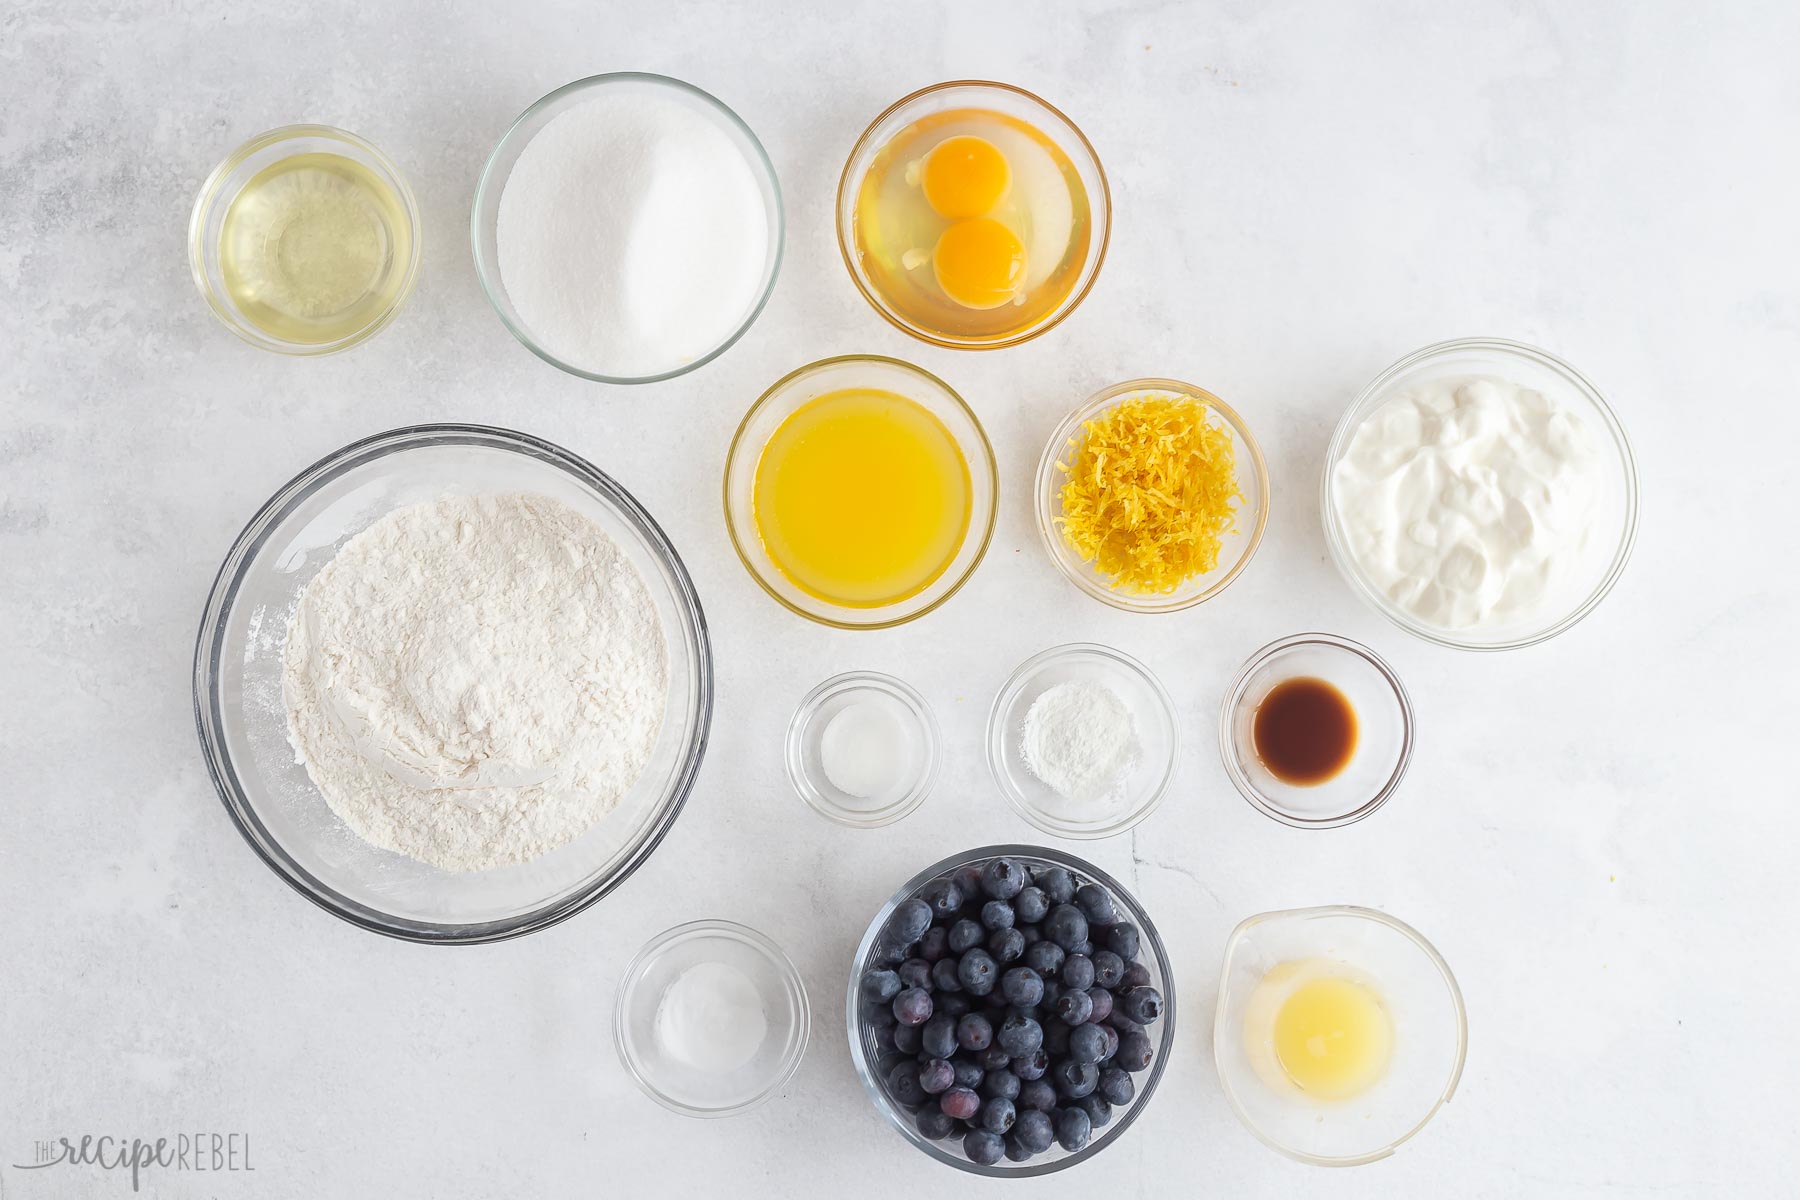 ingredients needed for lemon blueberry coffee cake